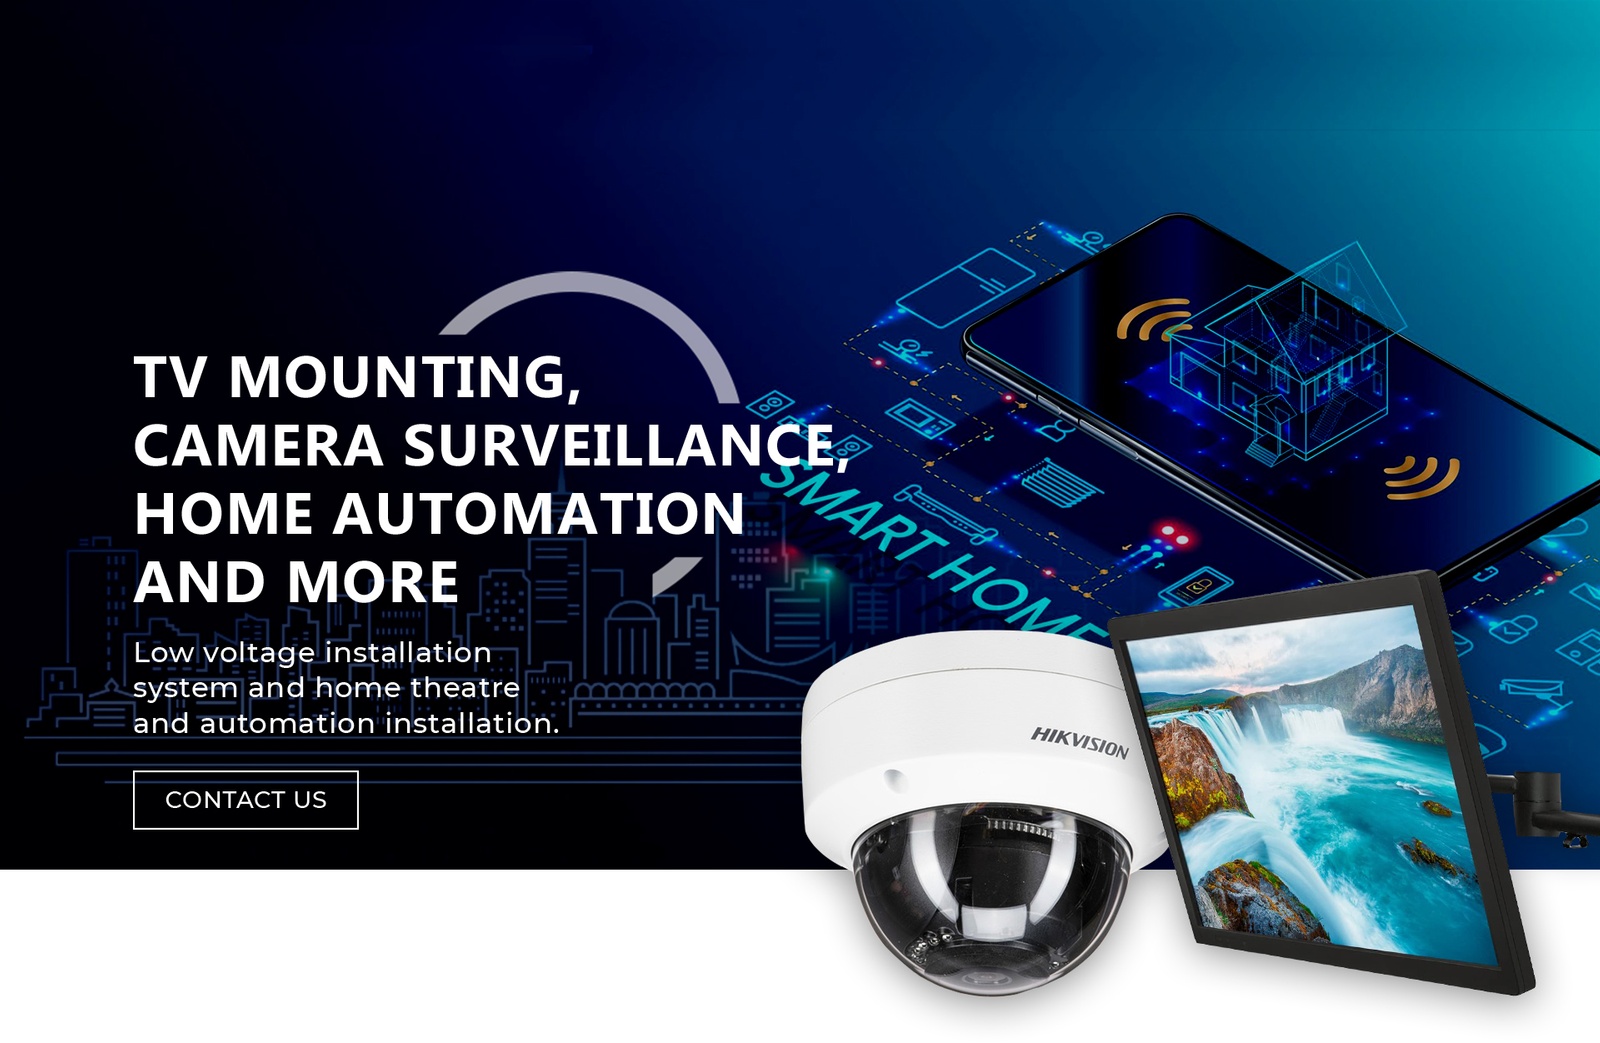 TV mounting, camera surveillance, home automation and more